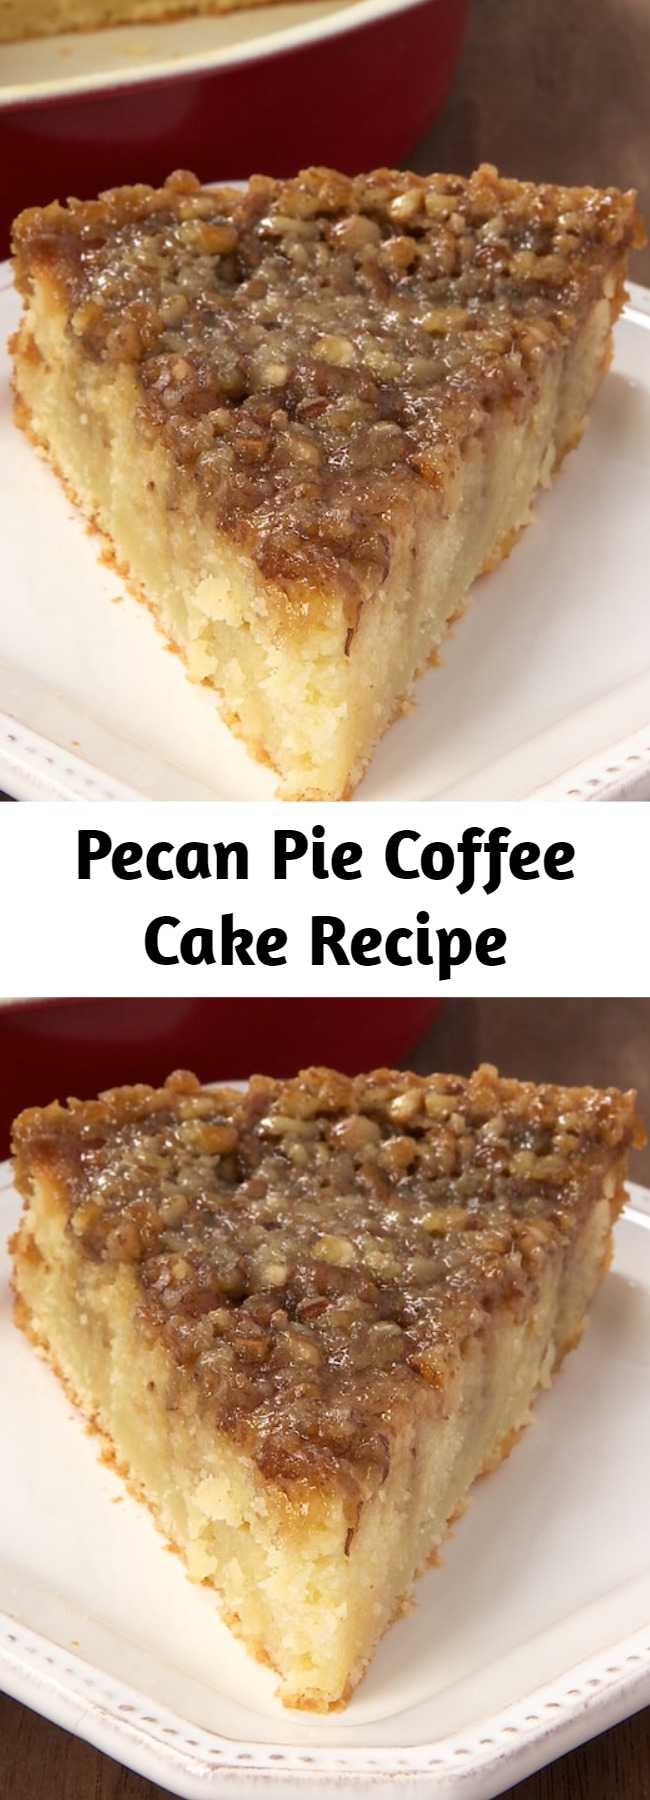 Pecan Pie Coffee Cake Recipe - Pecan Pie Coffee Cake is a delicious cake with a layer of pecan pie filling right on top!